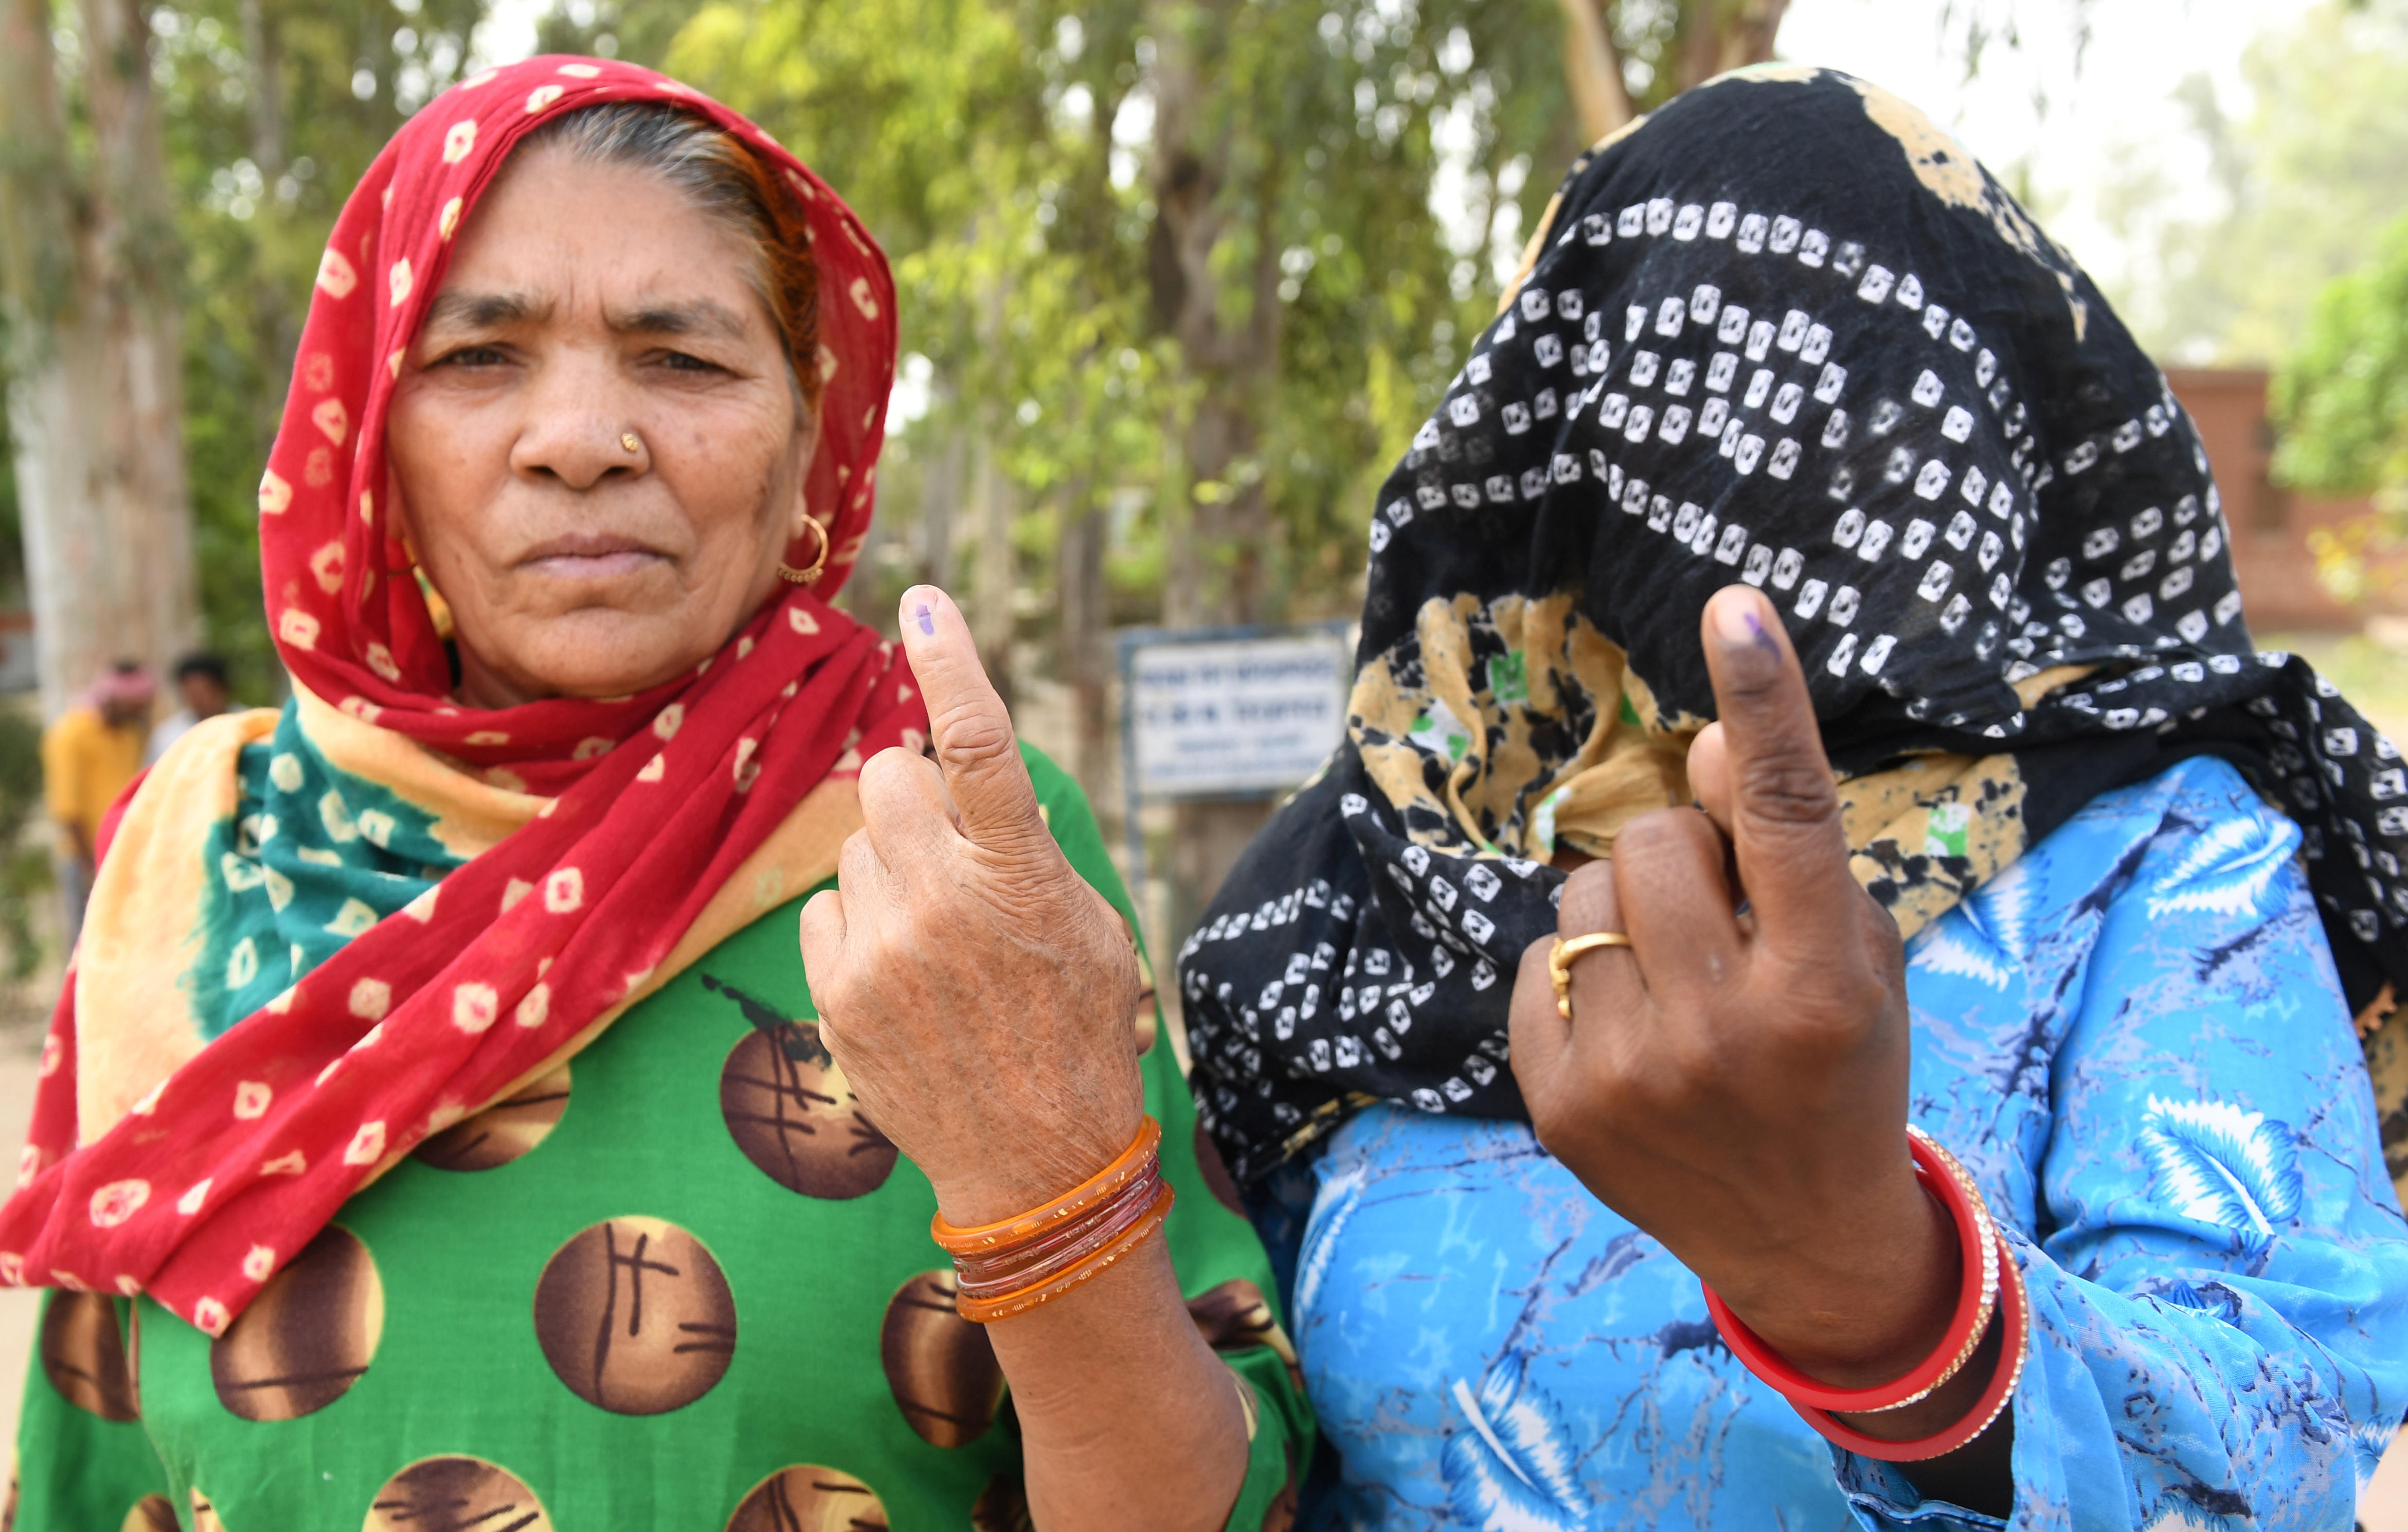 The city of Gurgaon in the northern Indian state of Haryana is also voting today.